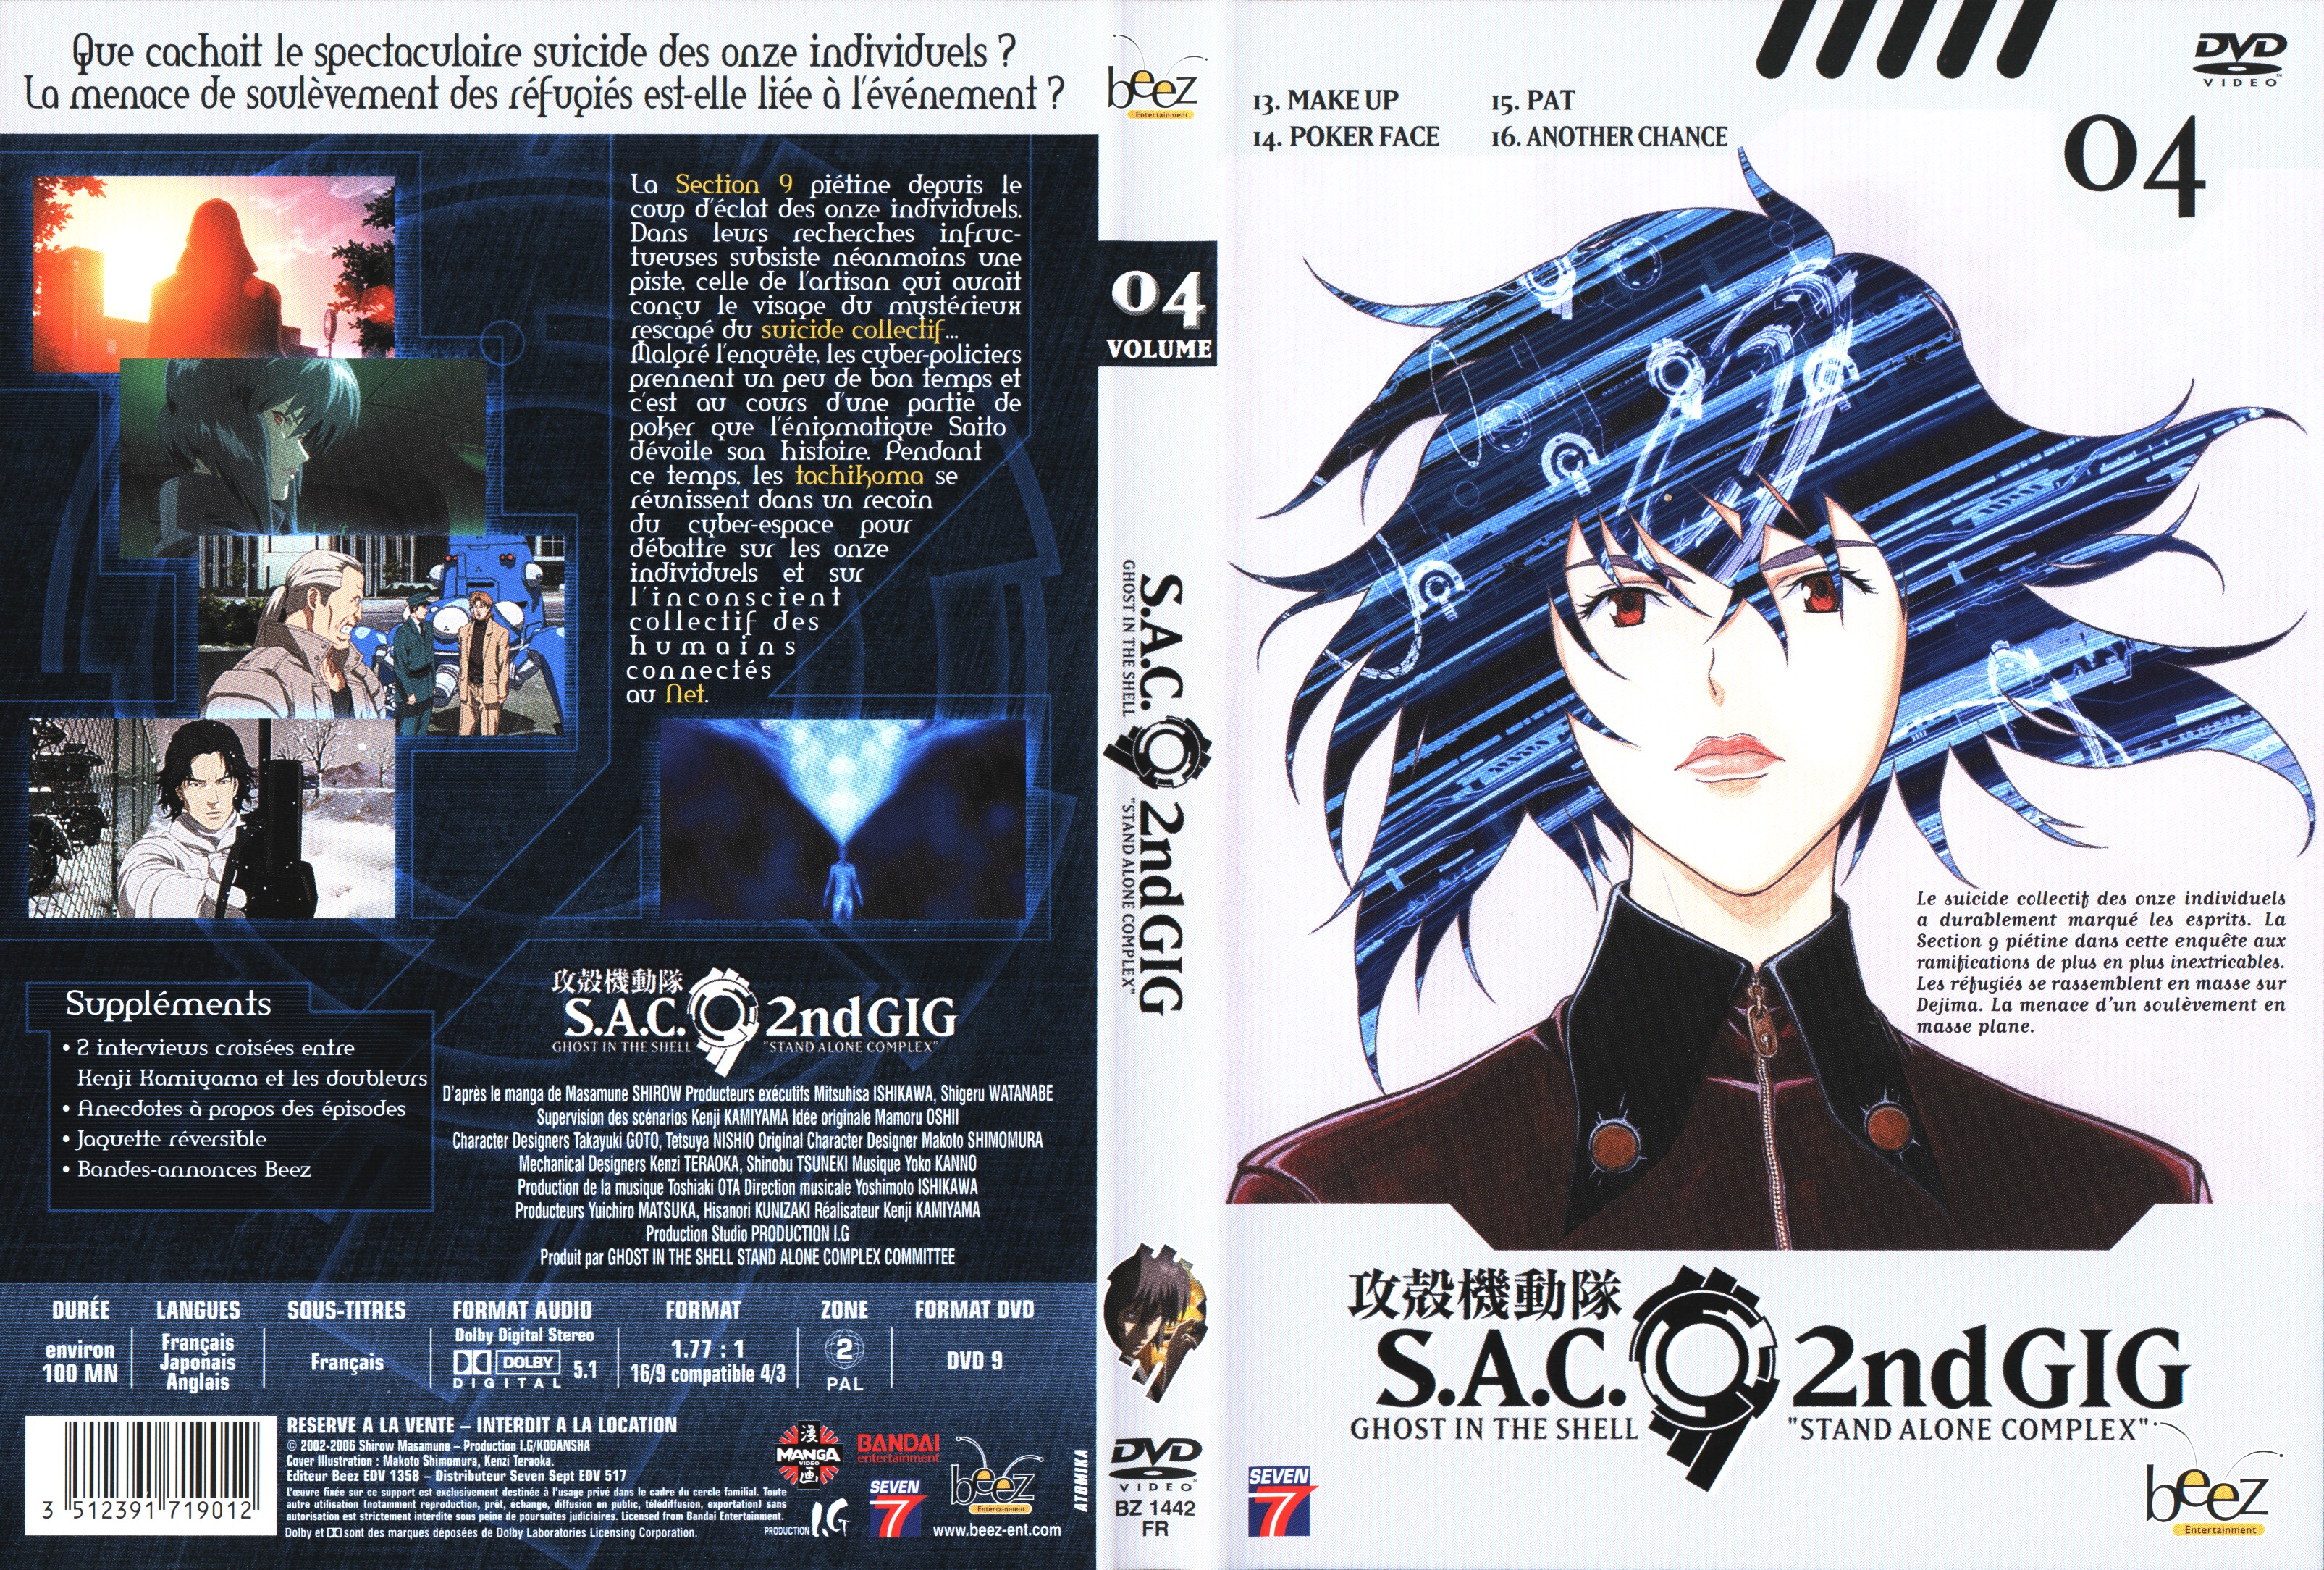 Jaquette DVD Ghost in the shell - stand alone complex 2nd GIG vol 4